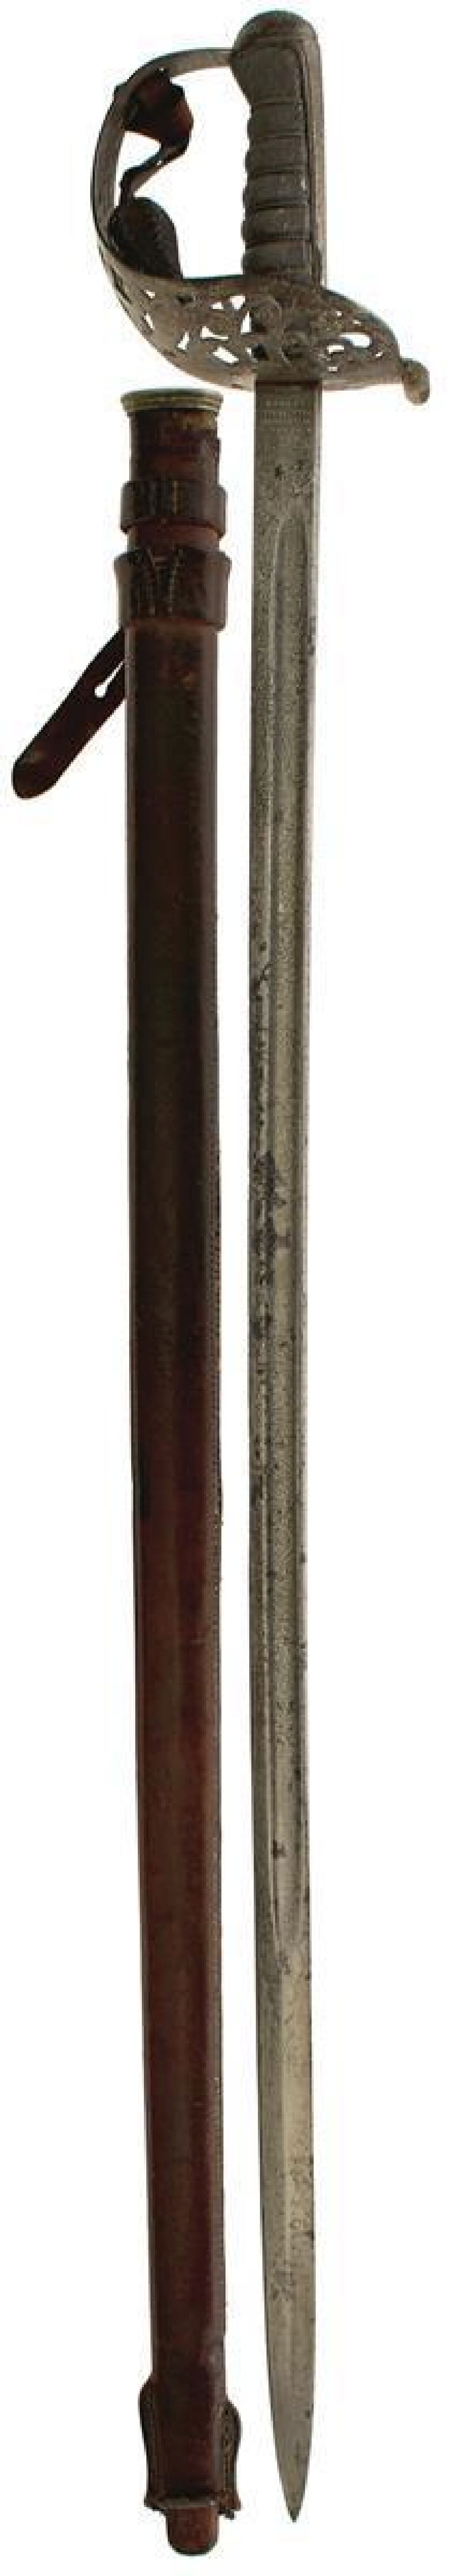 AN 1887 PATTERN HEAVY CAVALRY OFFICER'S UNDRESS SWORD TO THE 14TH HUSSARS, 86.5cm blade by